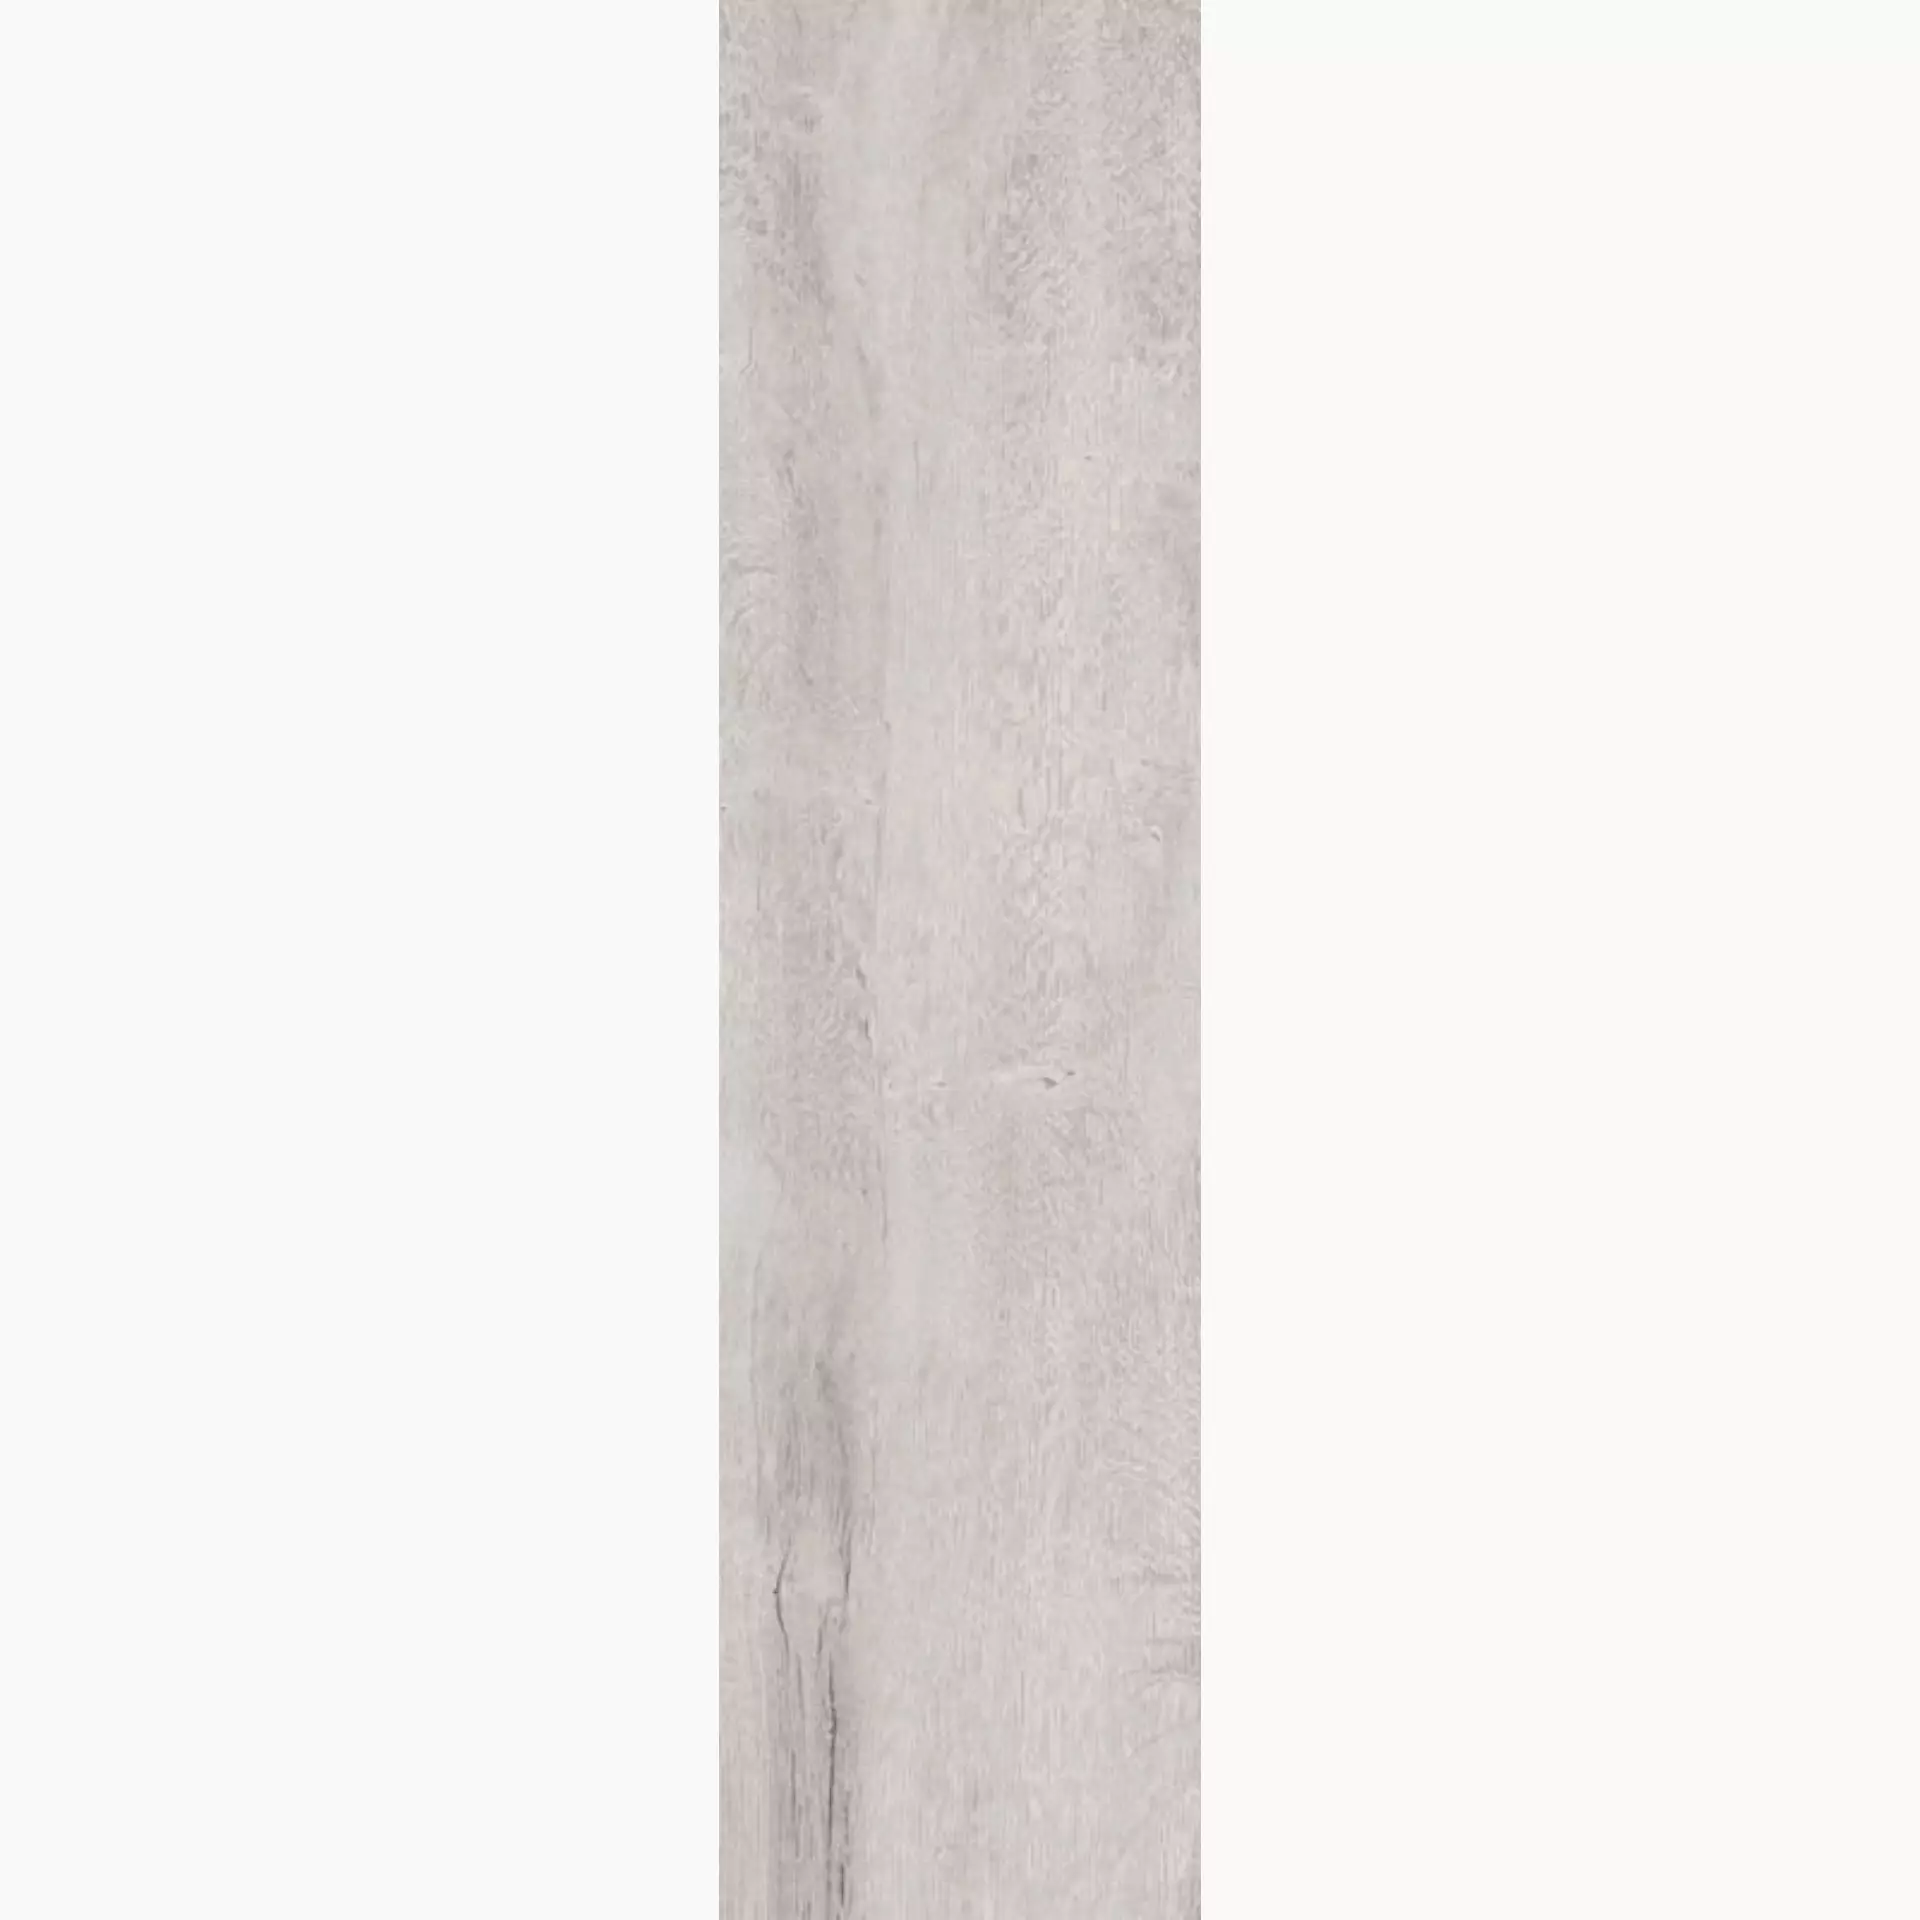 Sant Agostino Timewood Grey Natural CSATWGRY30 30x120cm rectified 10mm